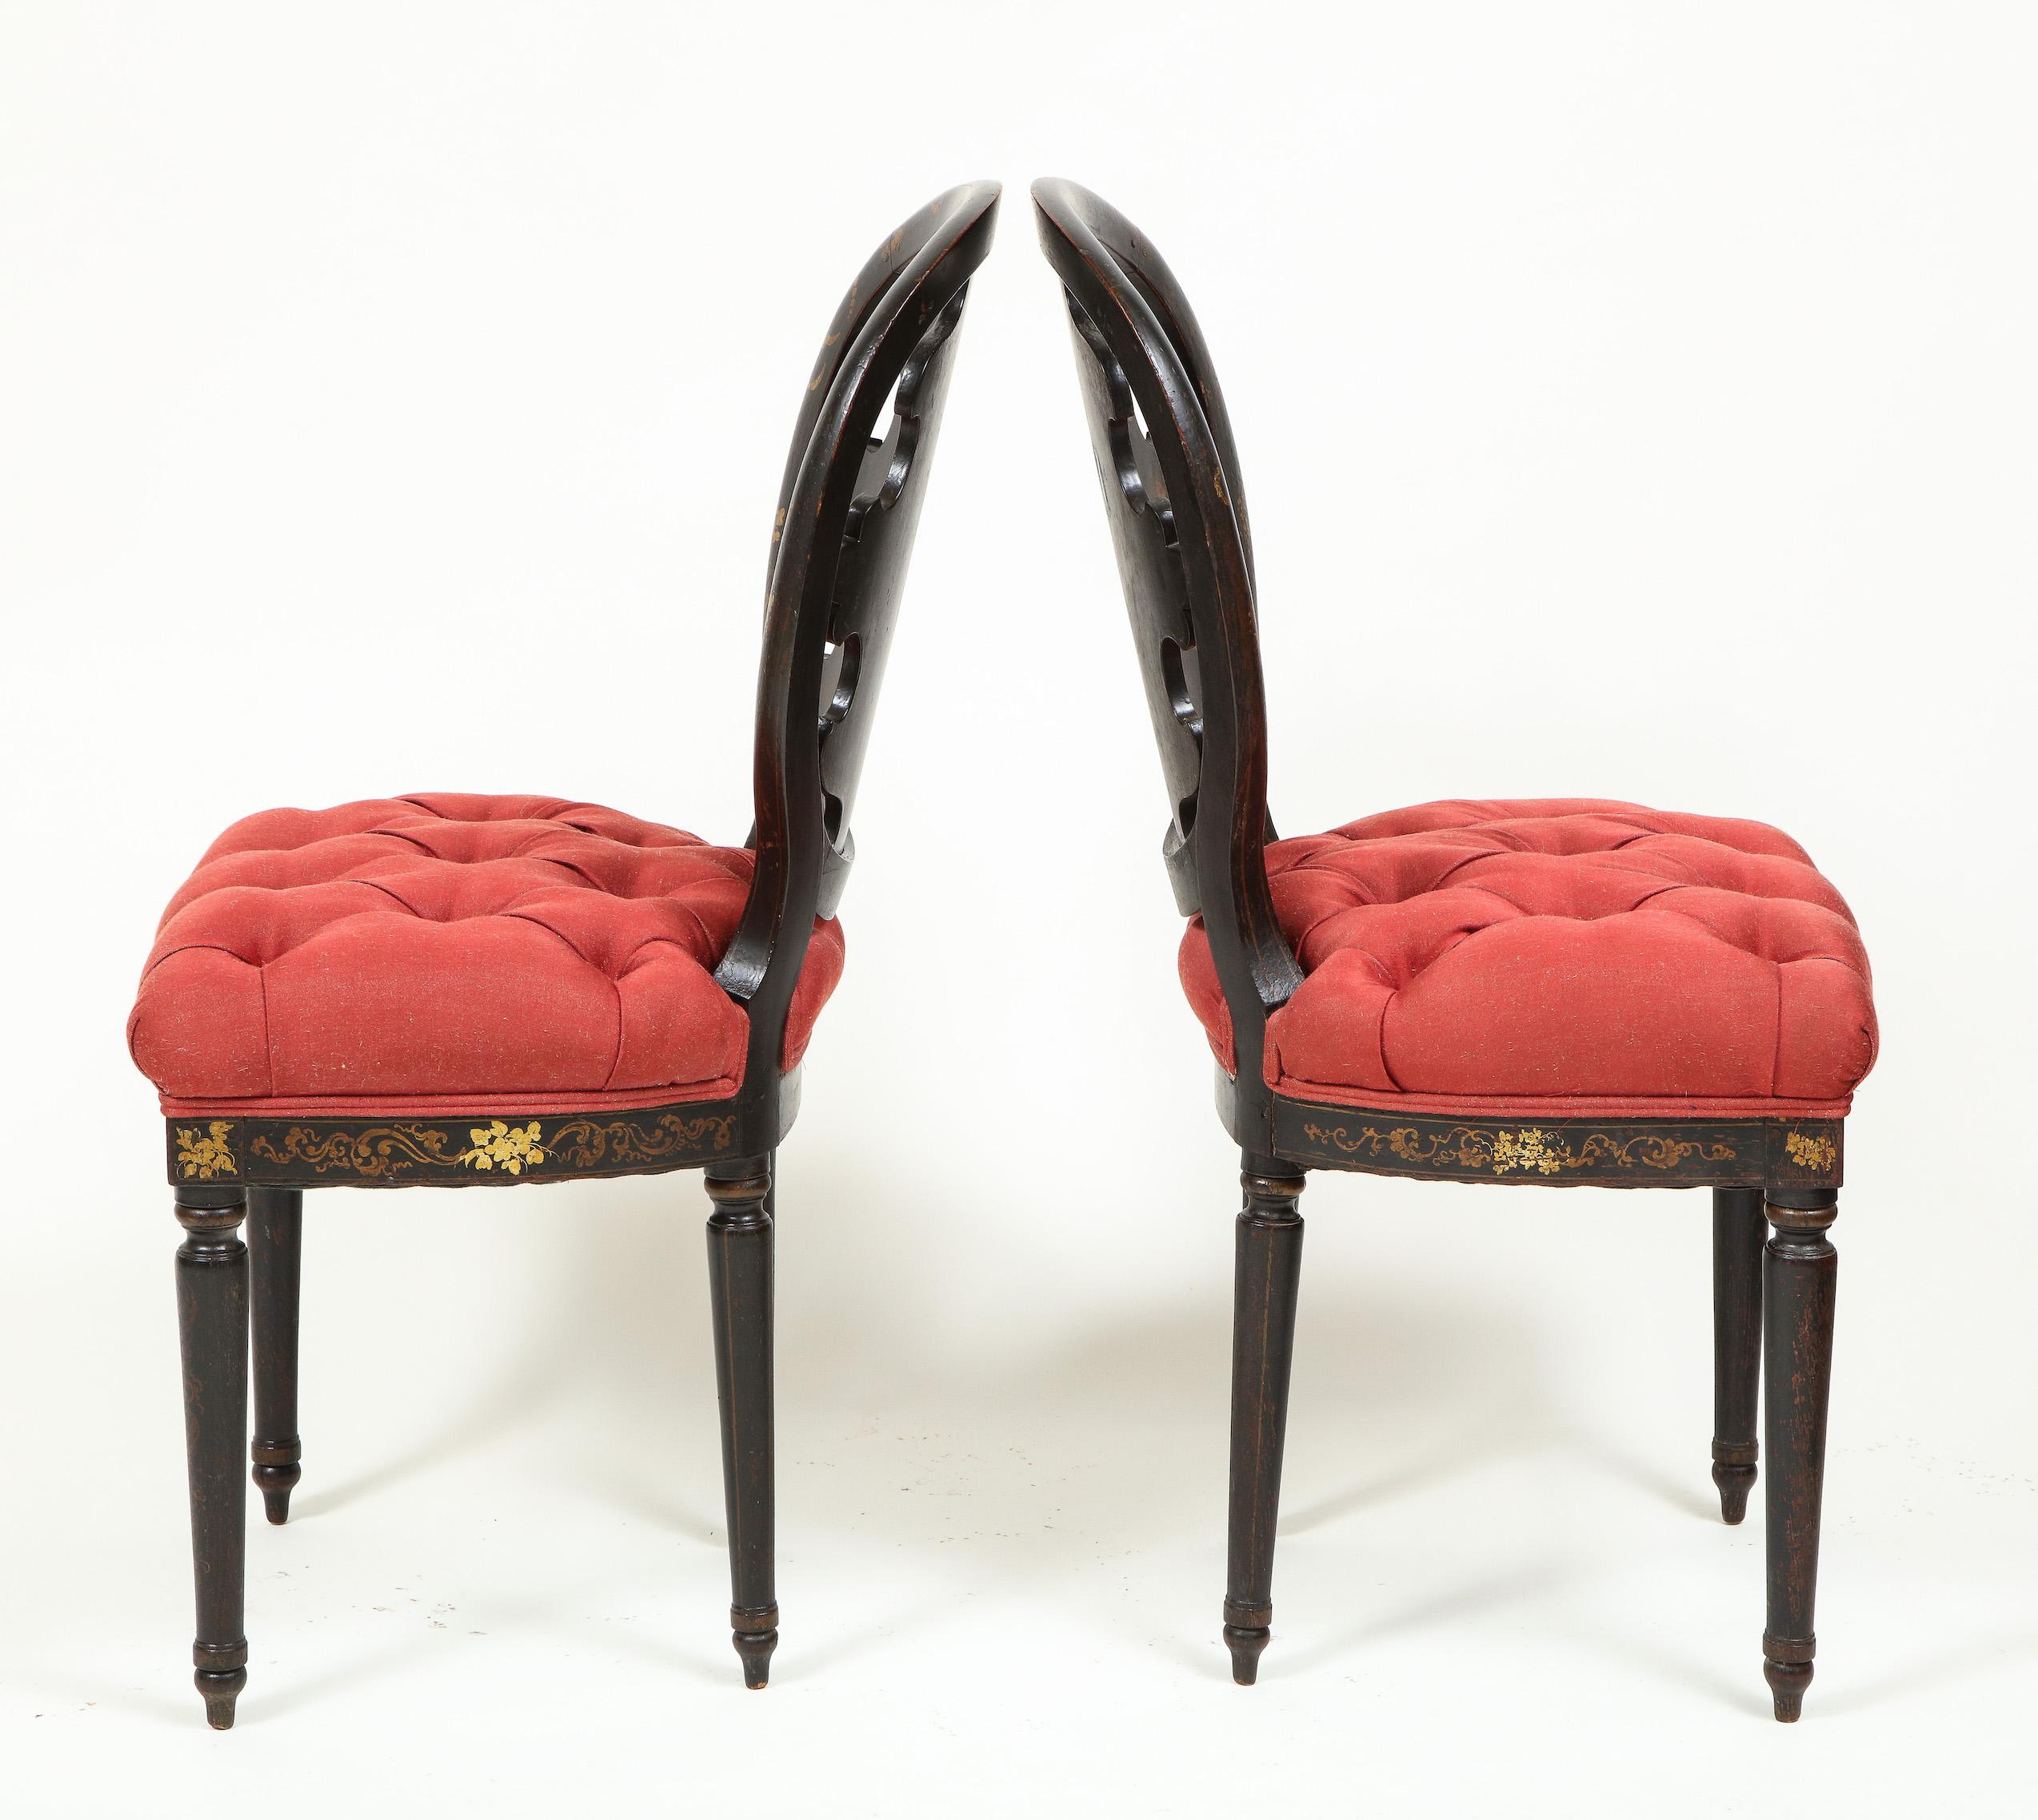 Mid-19th Century Pair of Victorian Black Japanned and Gilt Side Chairs